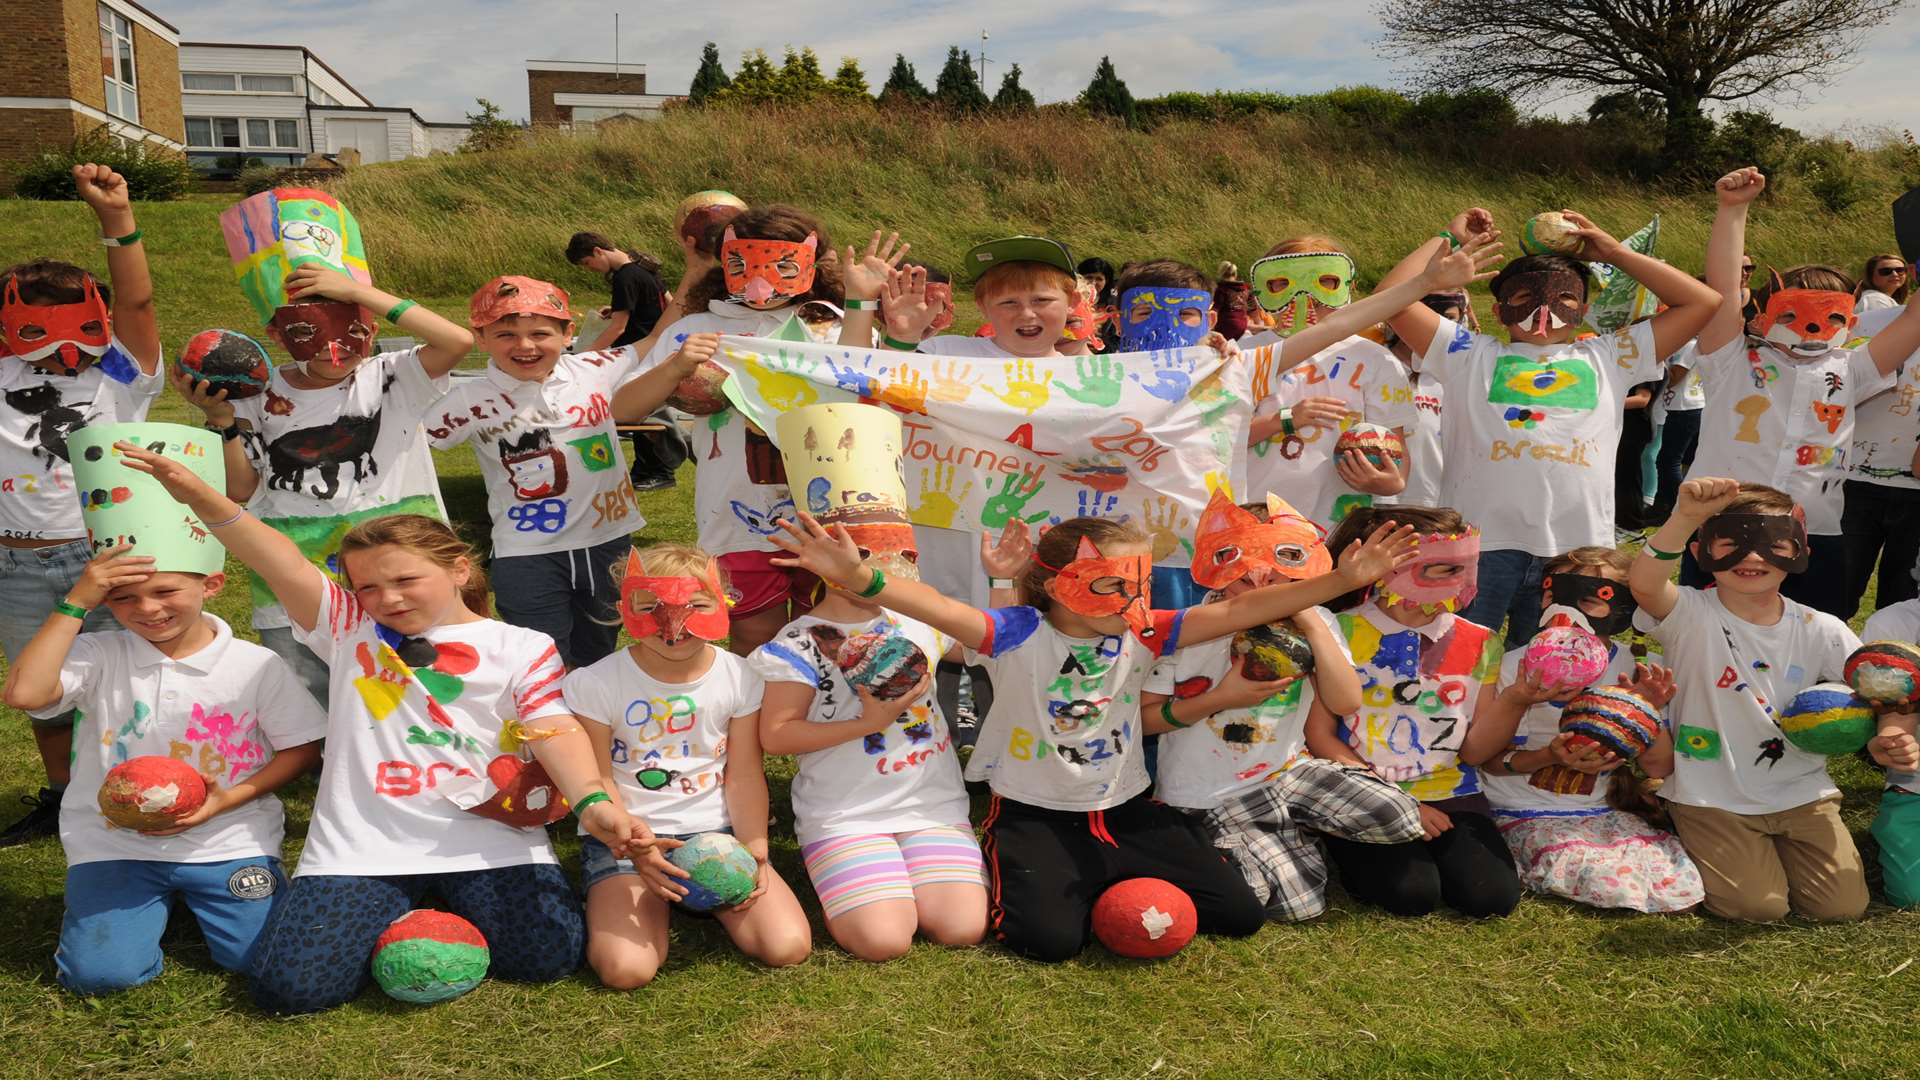 Saxon Way Primary Schools pupils celebrating at their carnival